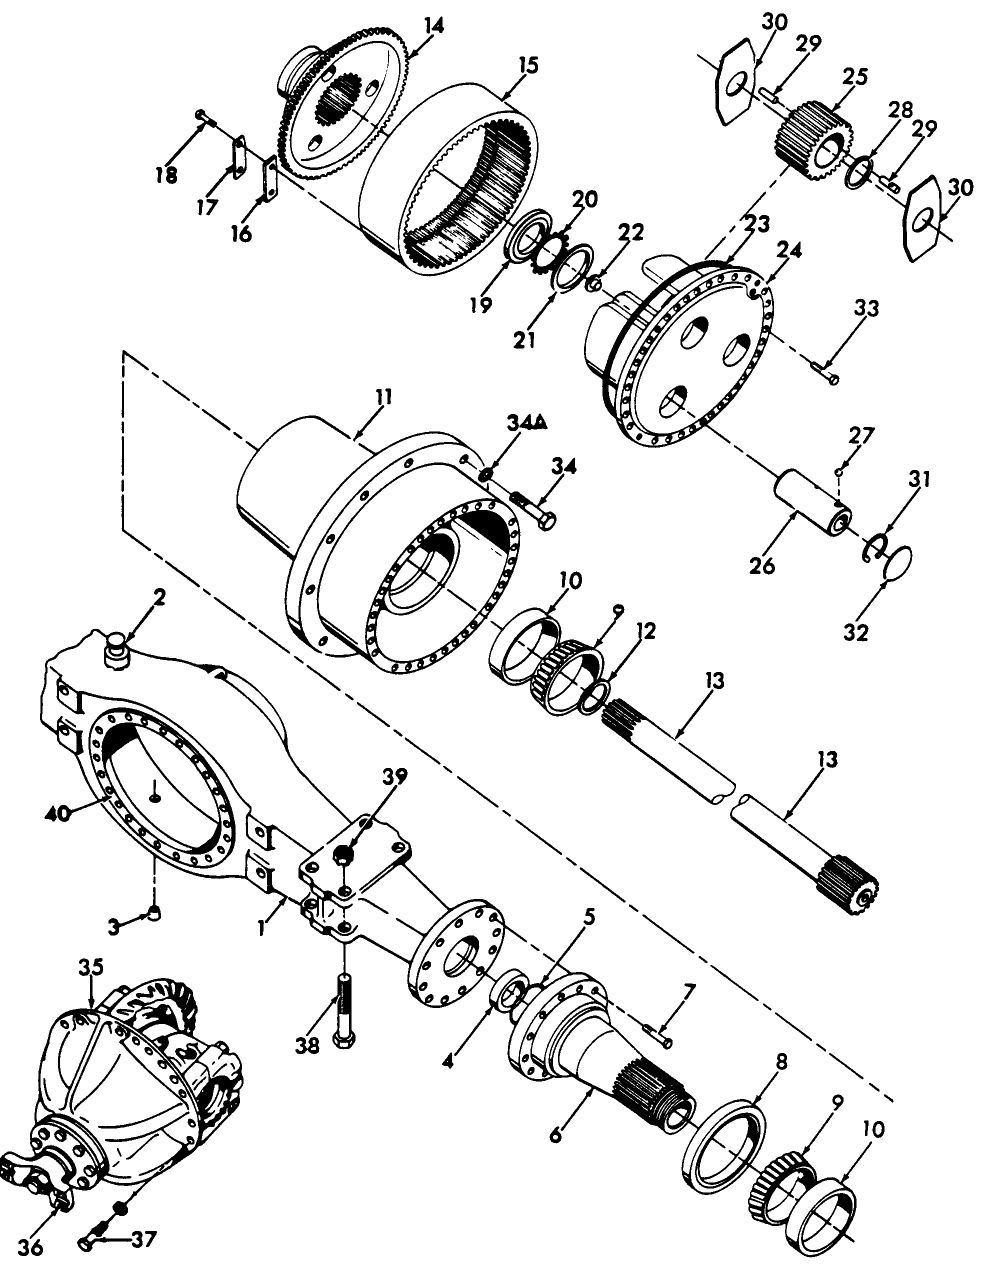 04A01 FRONT & REAR AXLE ASSEMBLY